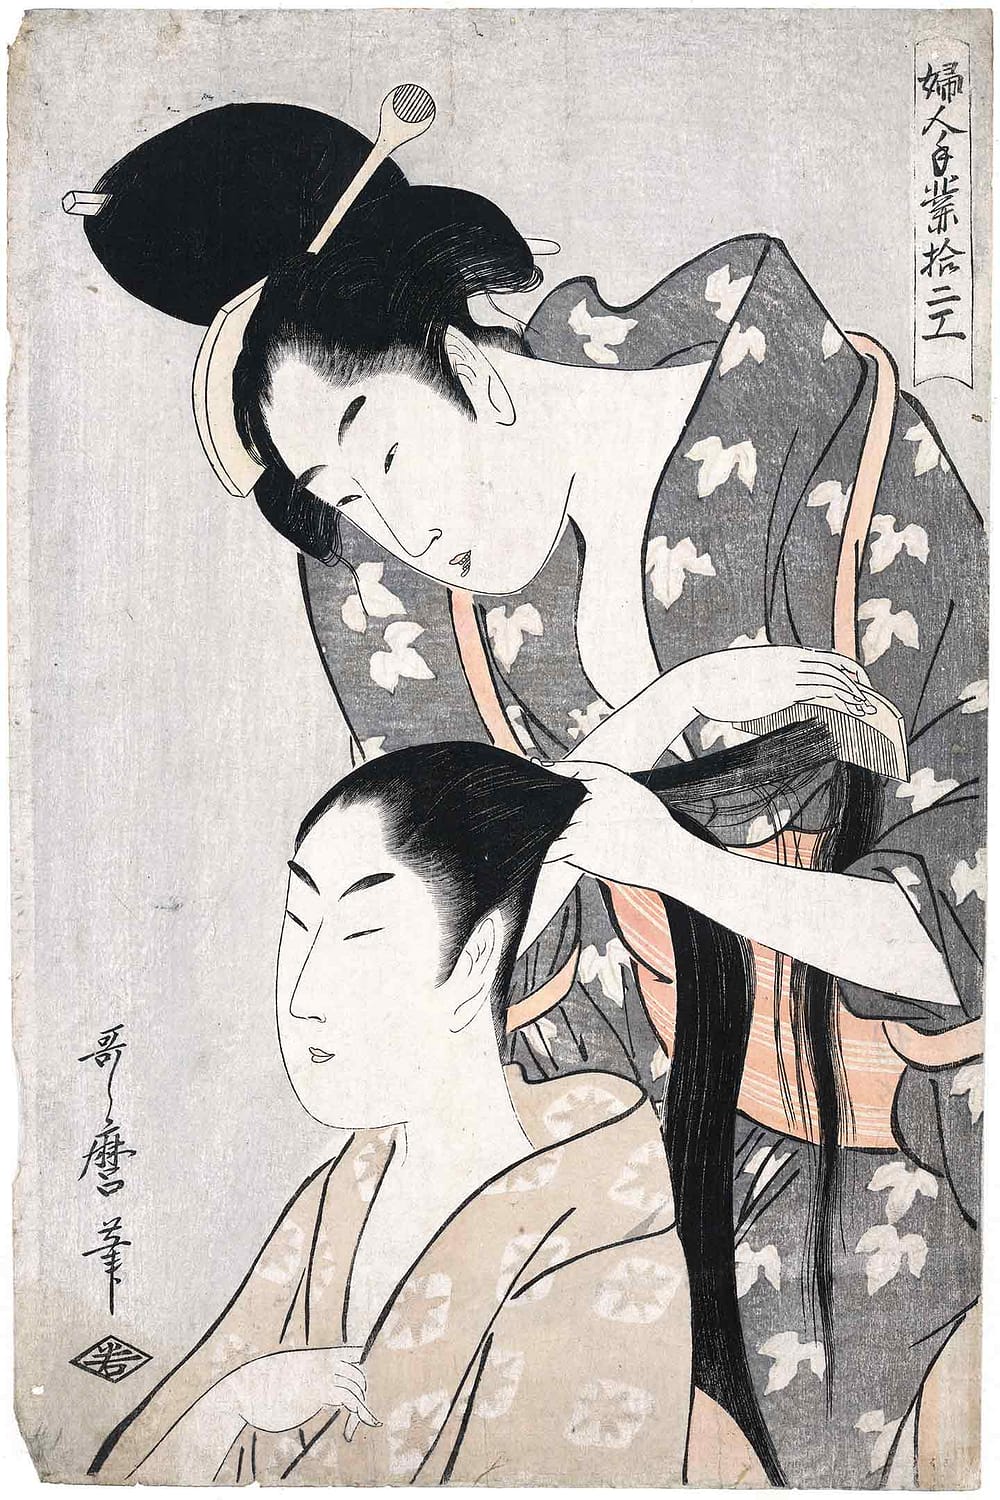 A woman combs the hair of another woman.